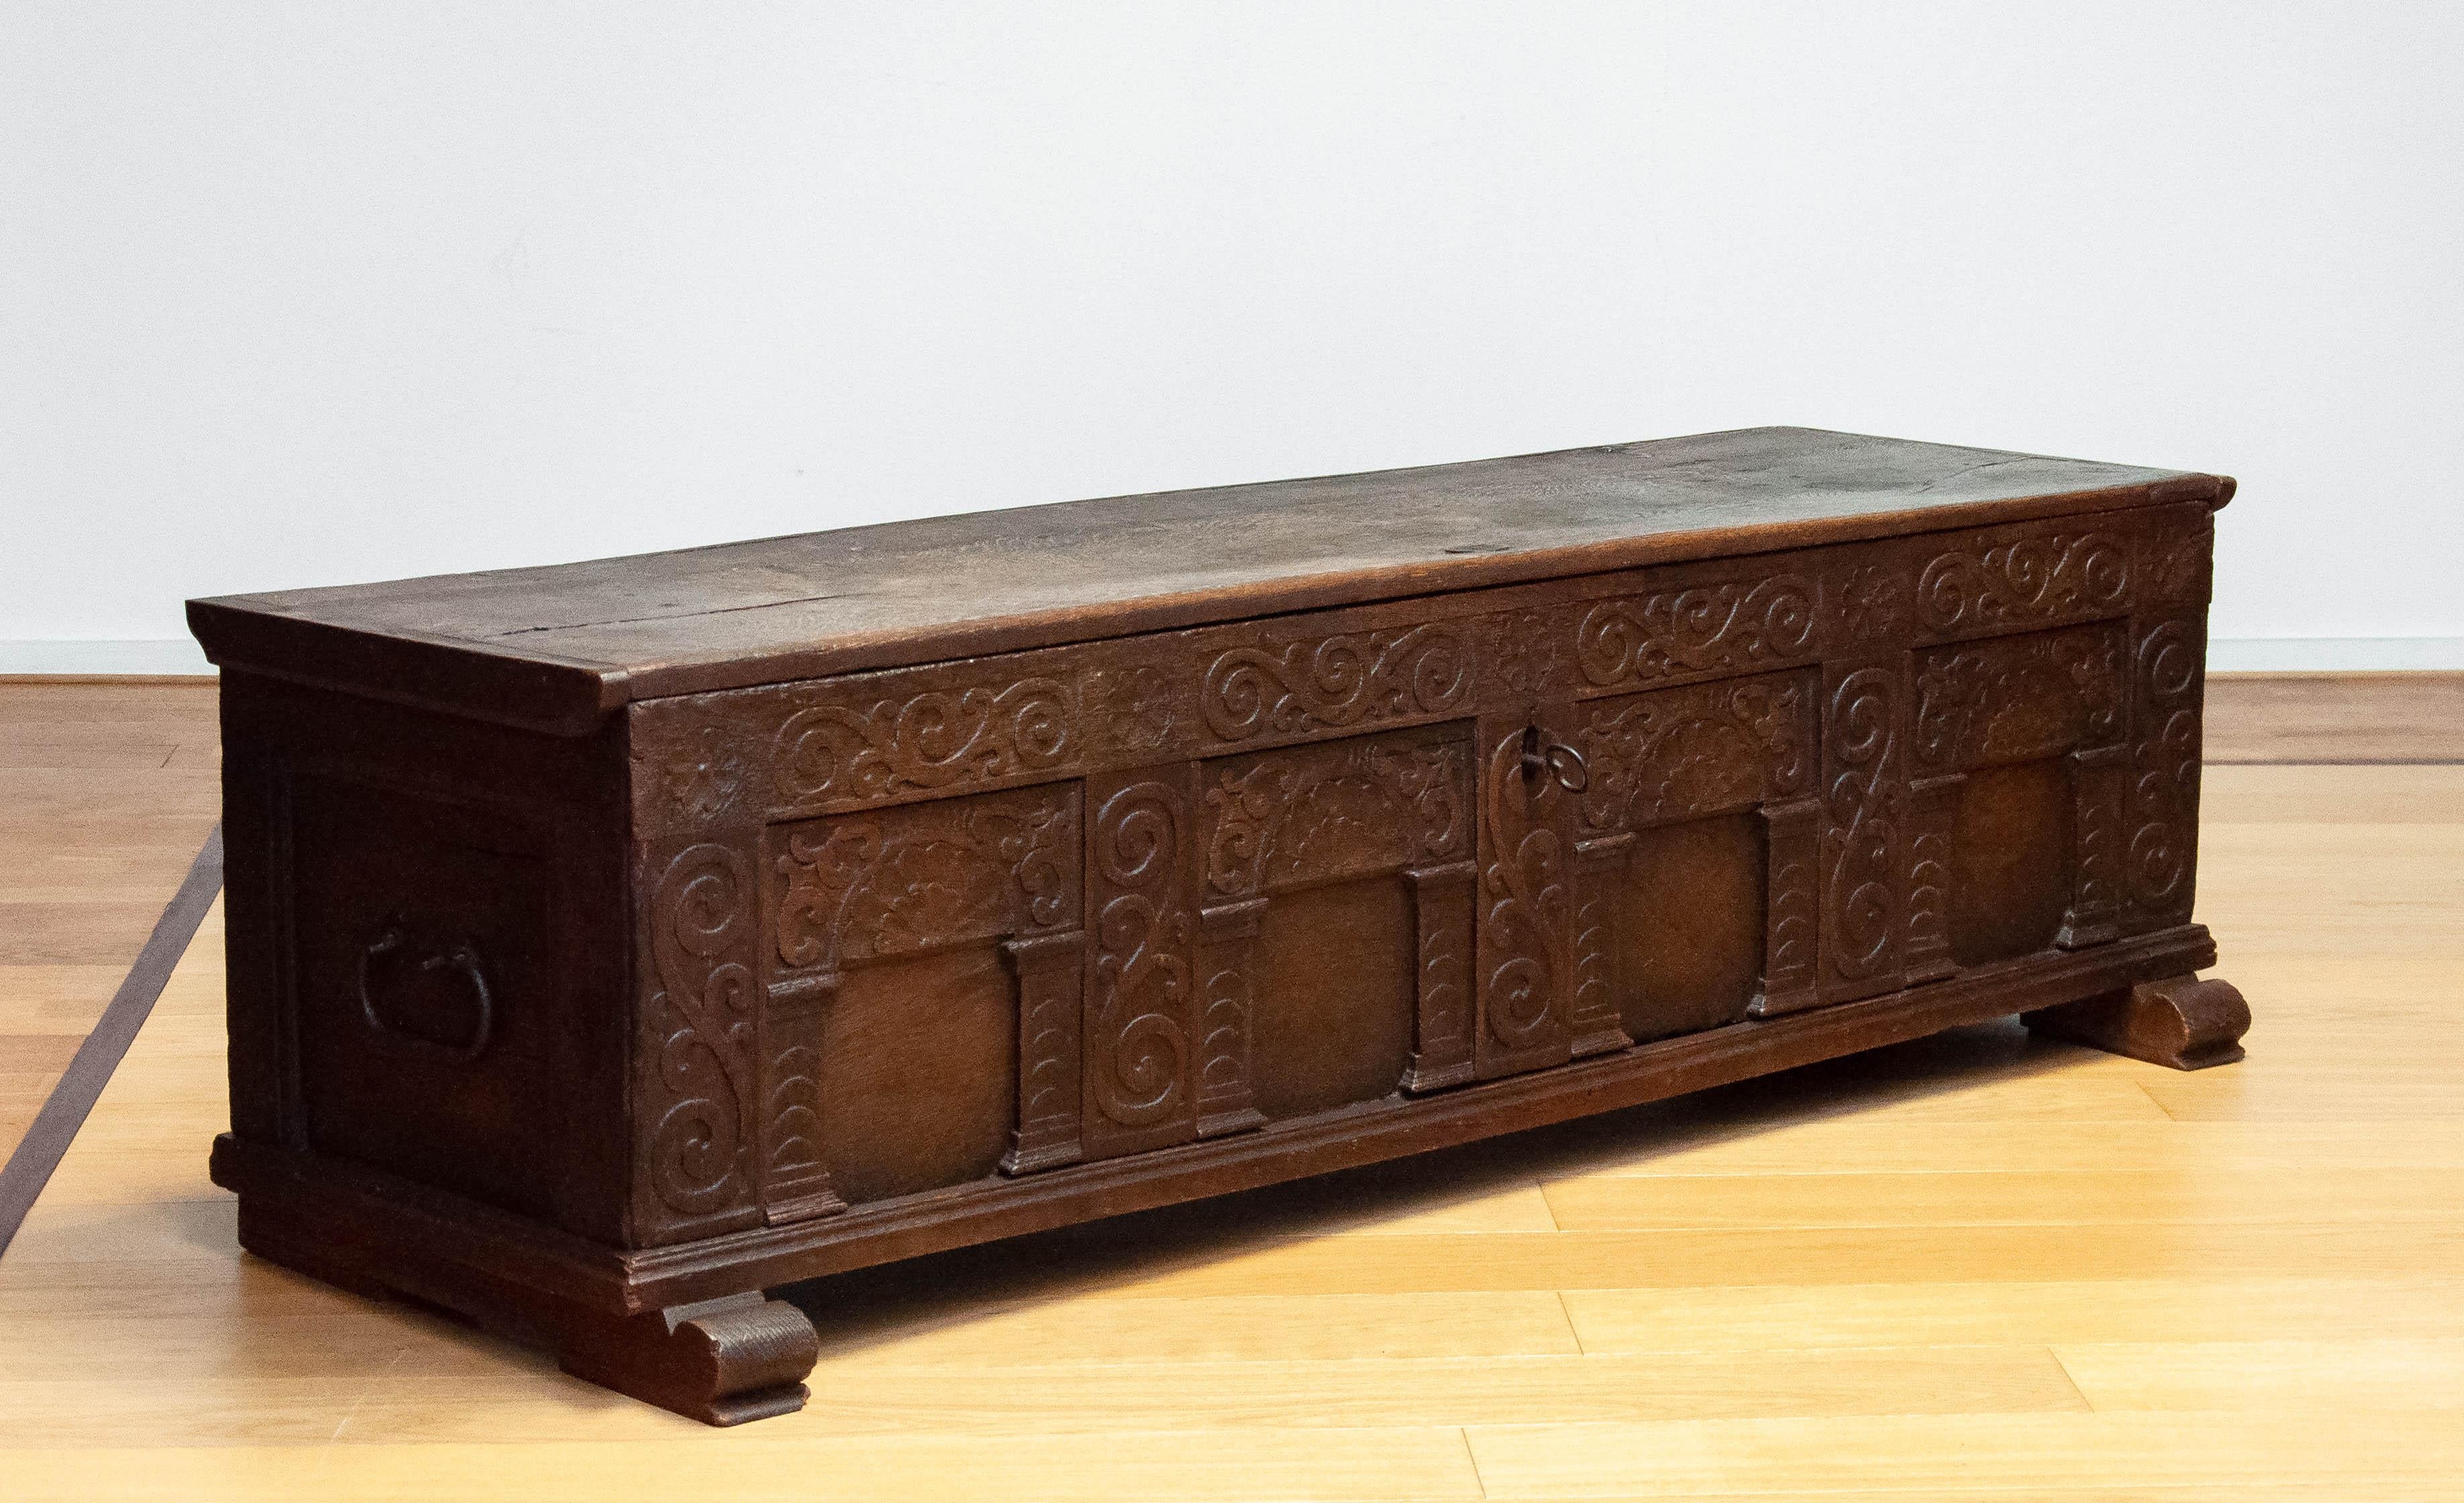 Absolute beautiful 17th century continental carved oak coffer, circa 1692.  Fine quality continental carved oak coffer from Germany, Free of any inscription. Beautifully carved arcaded front, complete with original lock and key and carrying handles